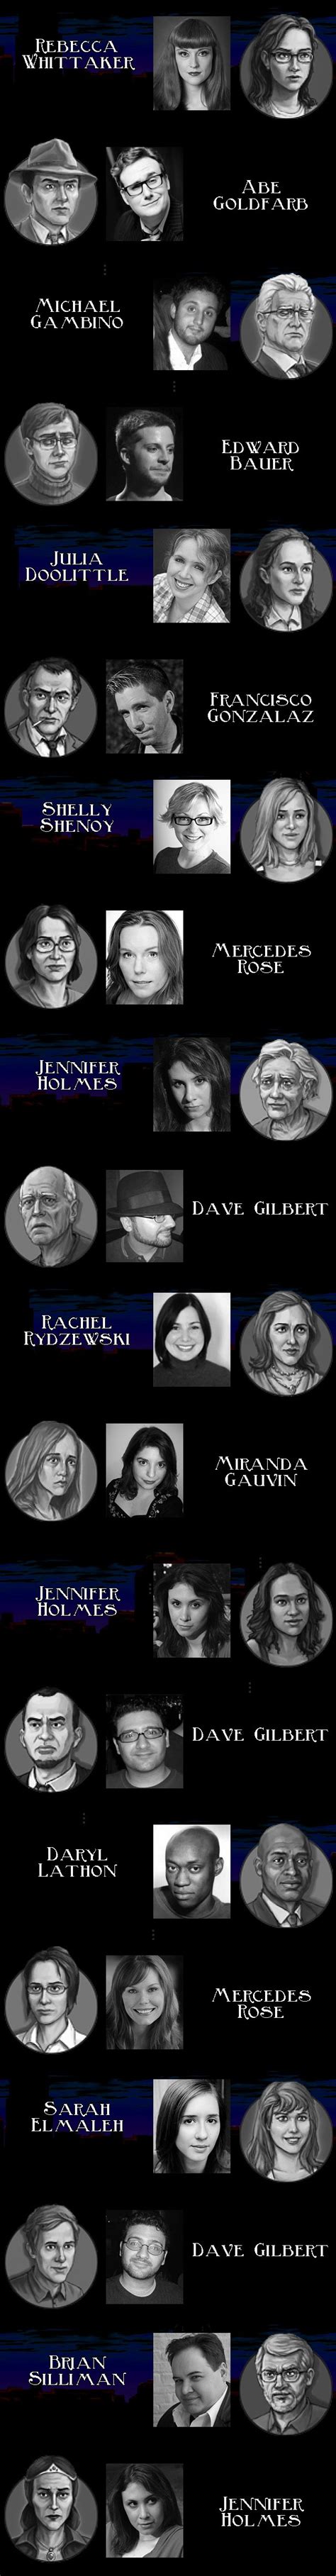 The Blackwell Deception 2011 Video Game Behind The Voice Actors